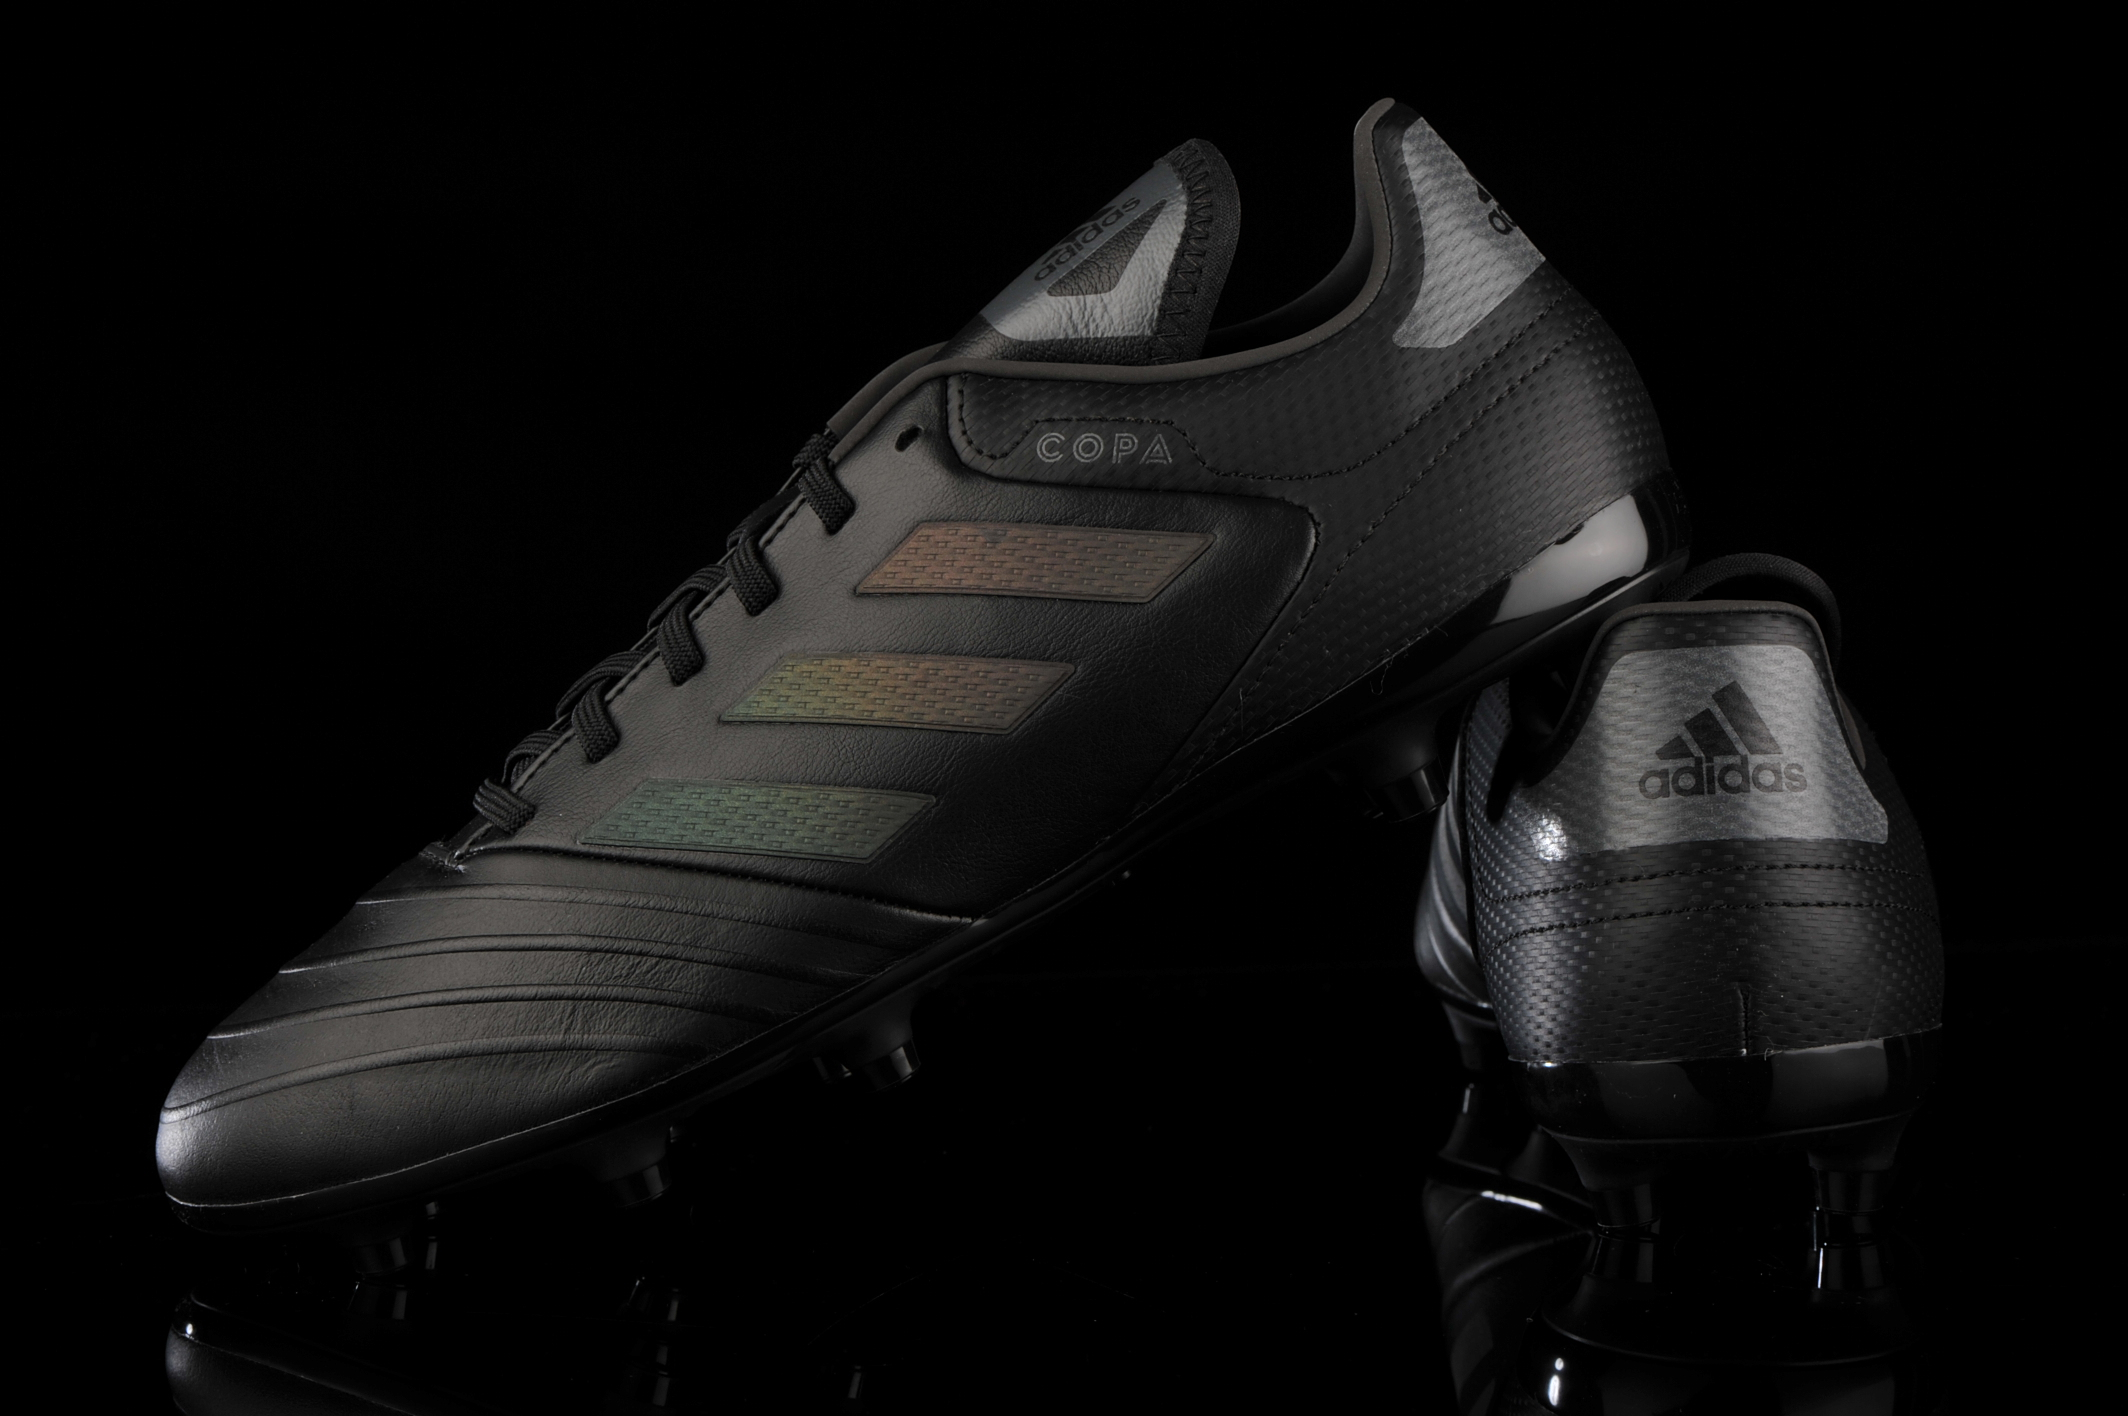 copa 18.3 firm ground boots